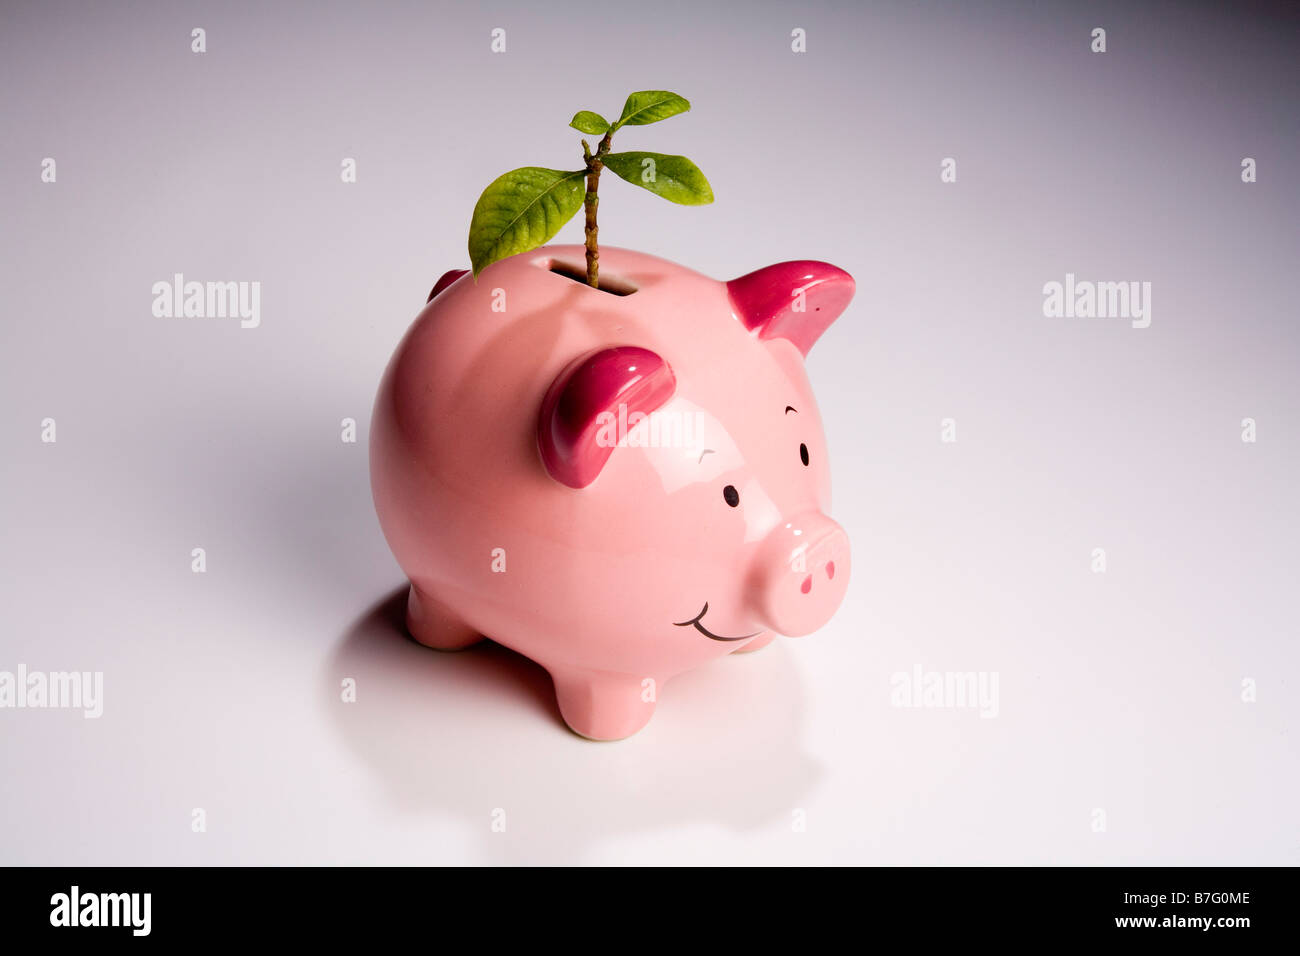 Green shoots of financial Recovery Stock Photo